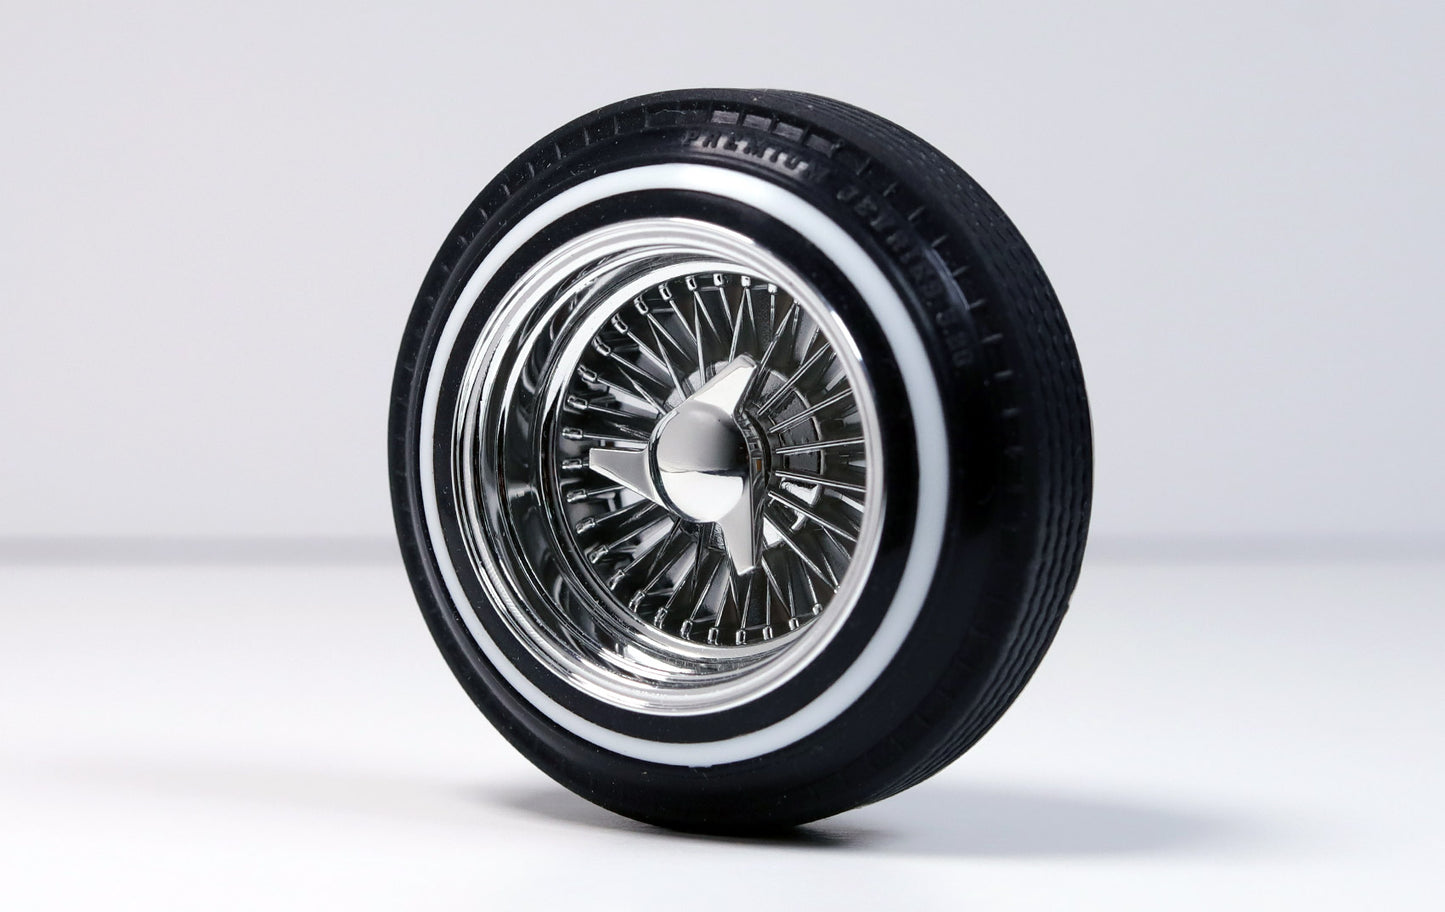 Classic 3 Wing Knock Offs for TRUE 13 Wheels (Gold or Chrome)